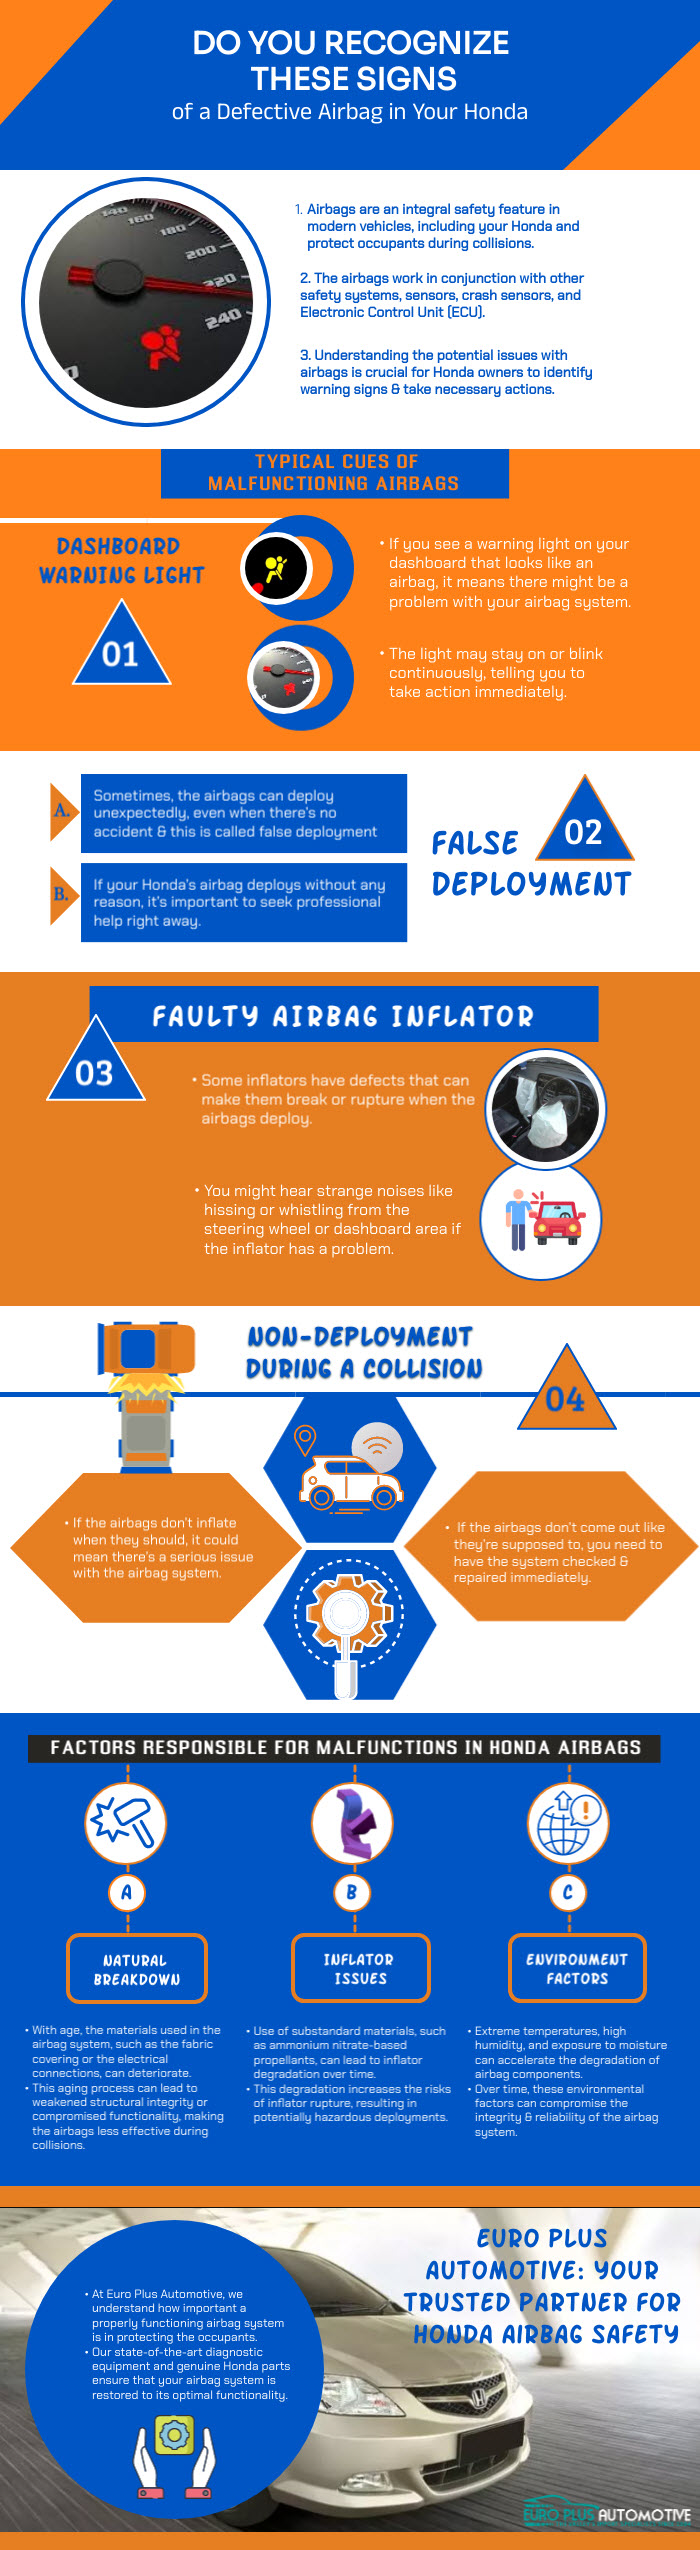 Do You Recognize These Signs of a Defective Airbag in Your Honda